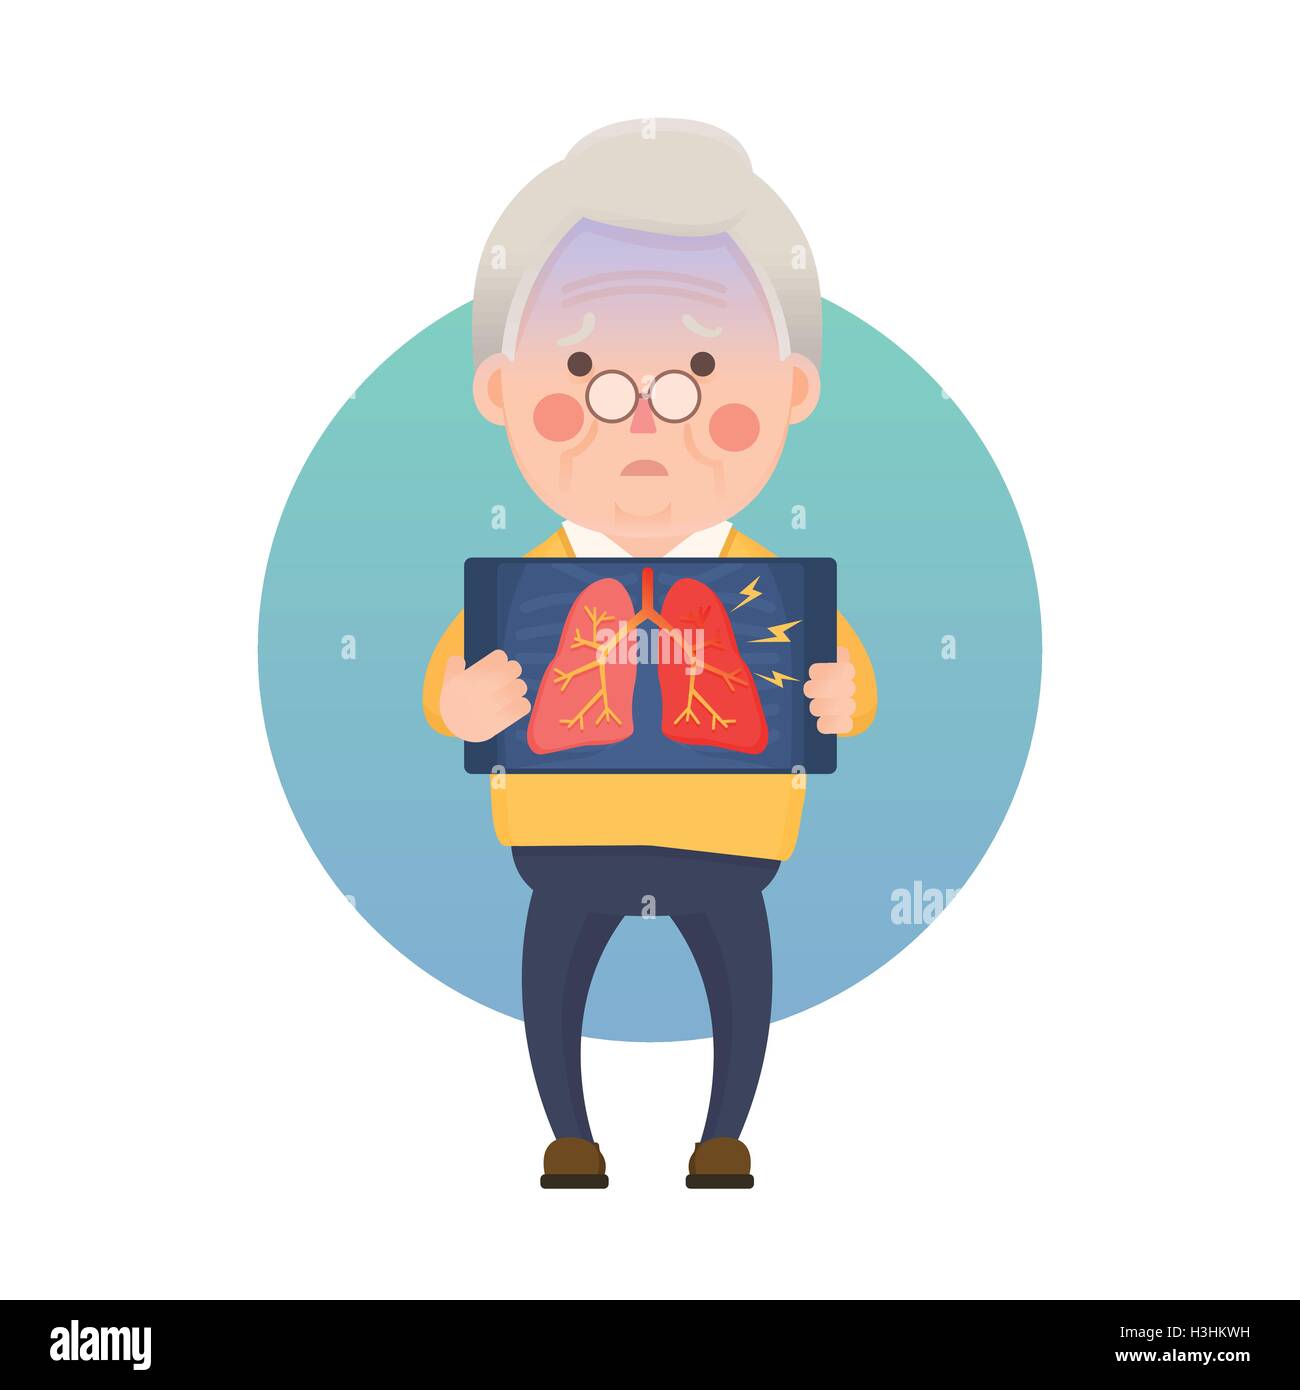 Vector Illustration of Old Man Holding X-ray Image Showing Inflammation Lung Problem, Cartoon Character Stock Vector